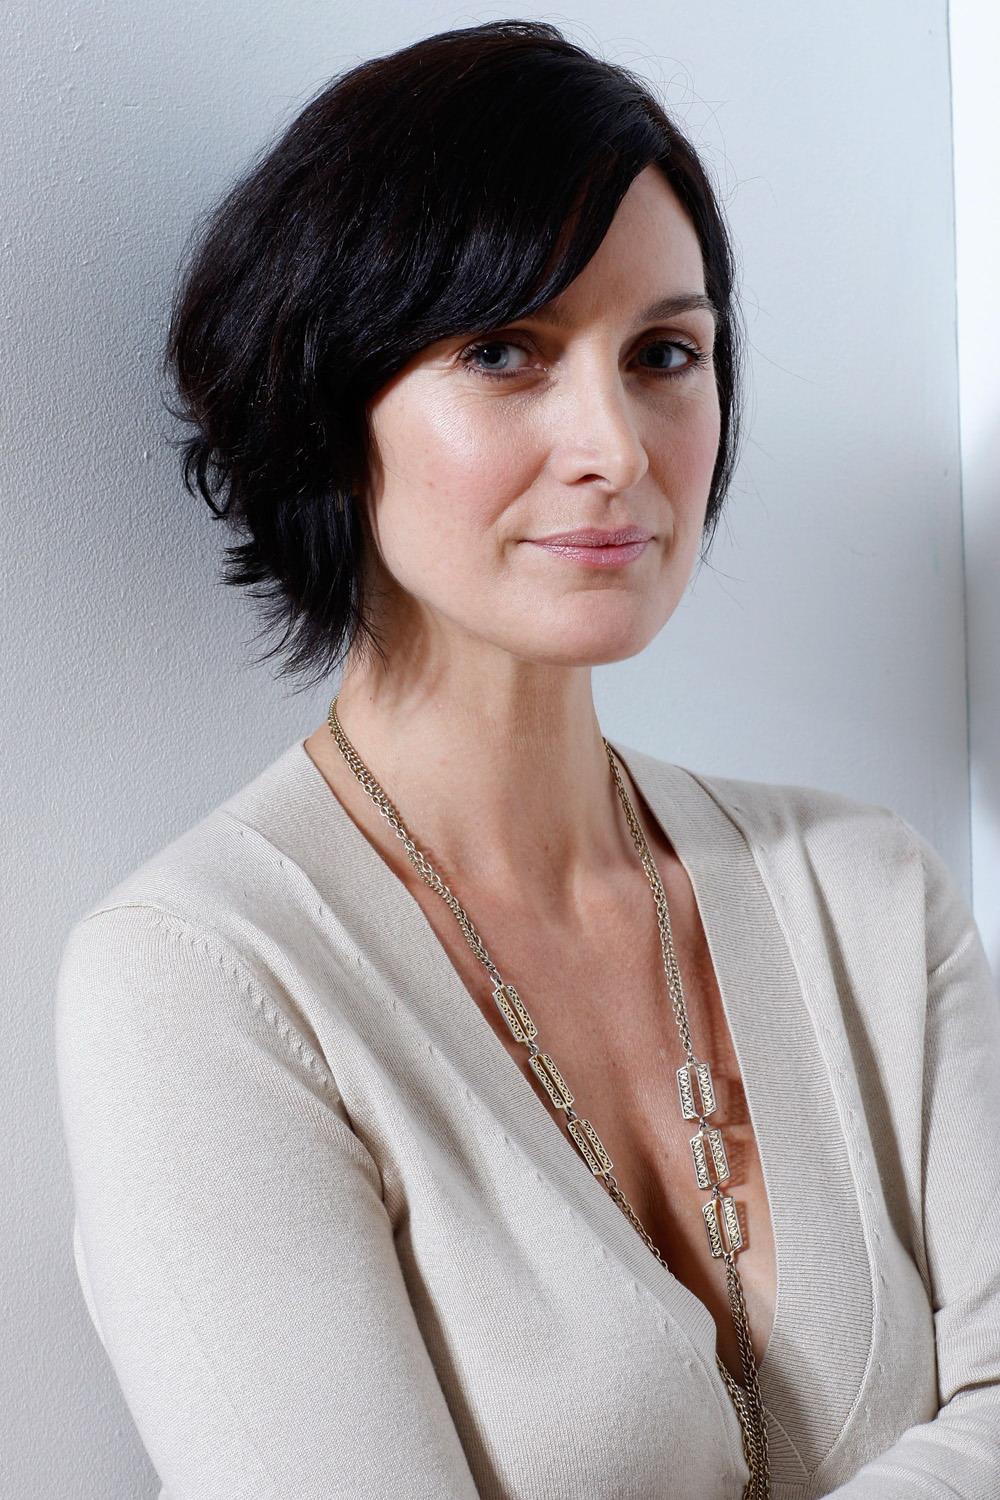 Photo №10092 Carrie-Anne Moss.